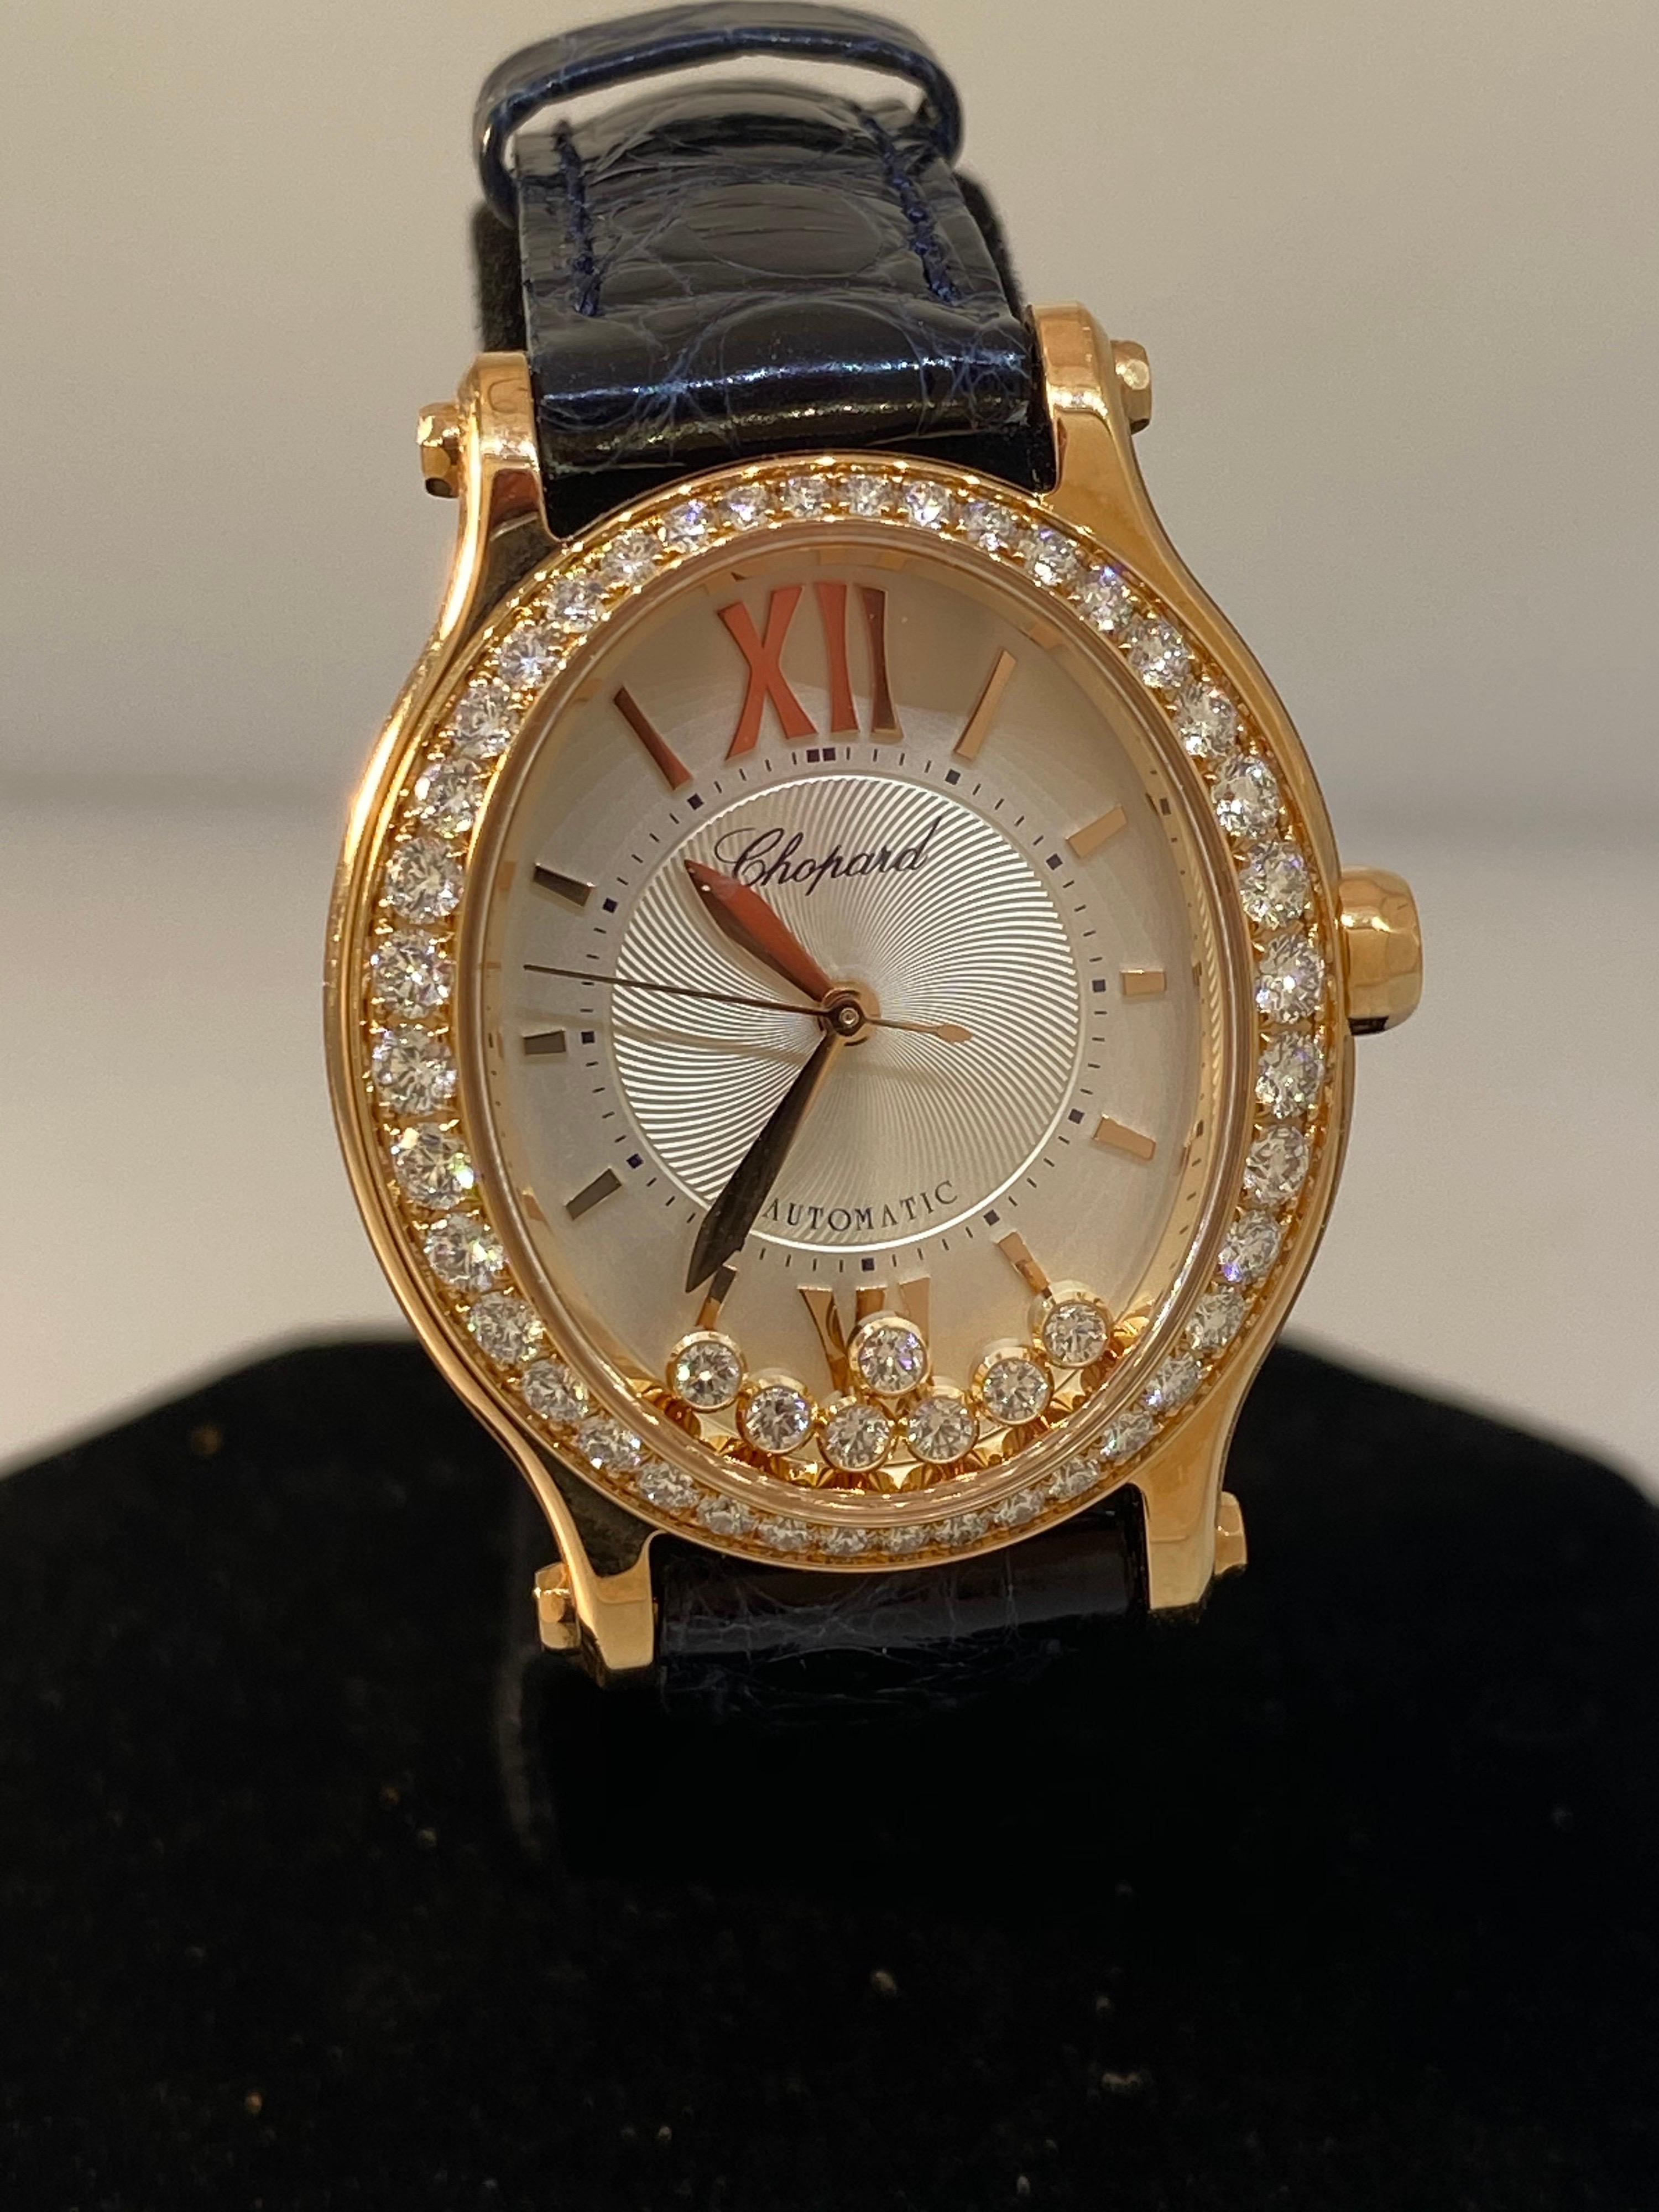 Chopard Happy Sport Oval Ladies Watch

Model Number: 27/5362-5002

100% Authentic

Brand New

Comes with original Chopard box, certificate of authenticity and warranty and instruction manual

18 Karat Rose Gold Case & Buckle

Scratch Resistant